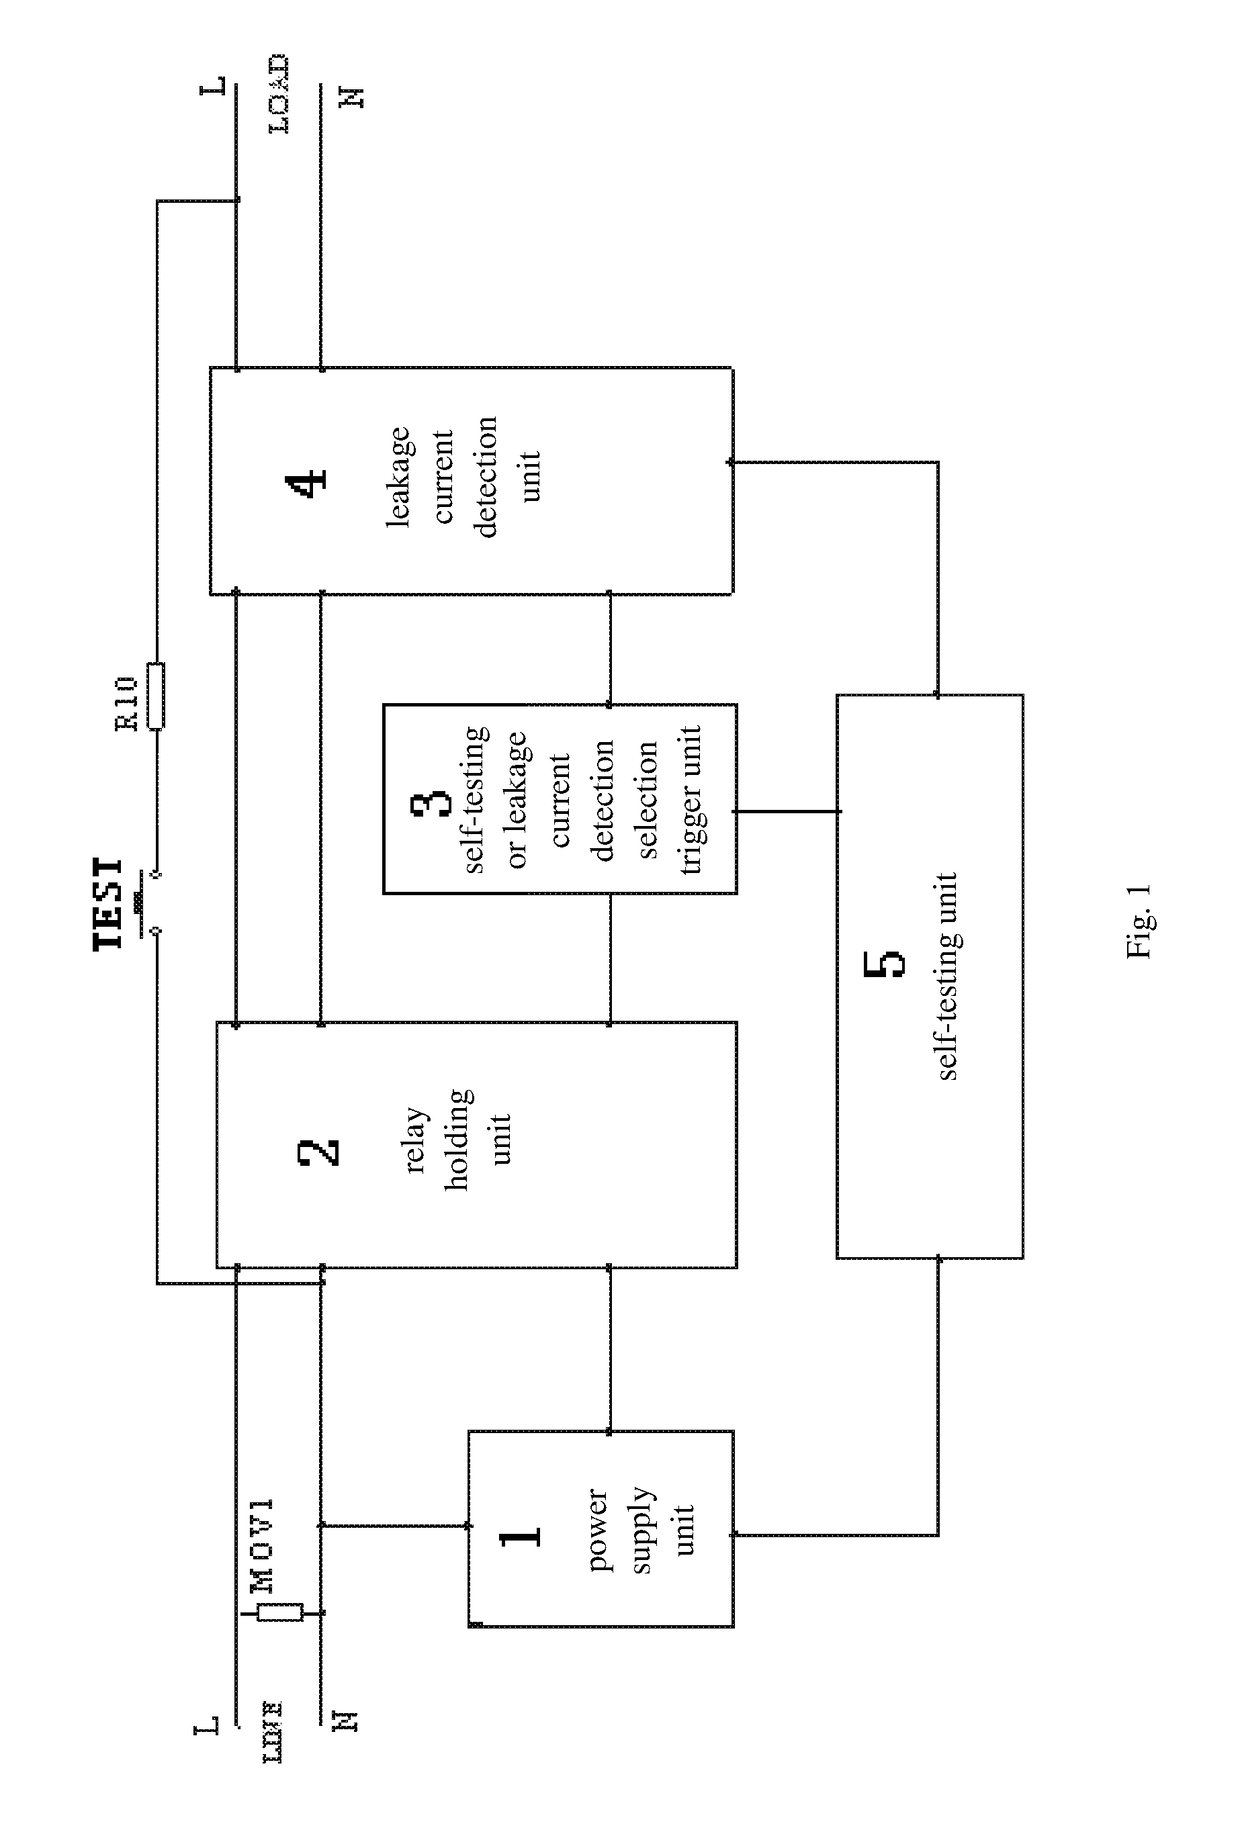 Leakage current detection device for appliances